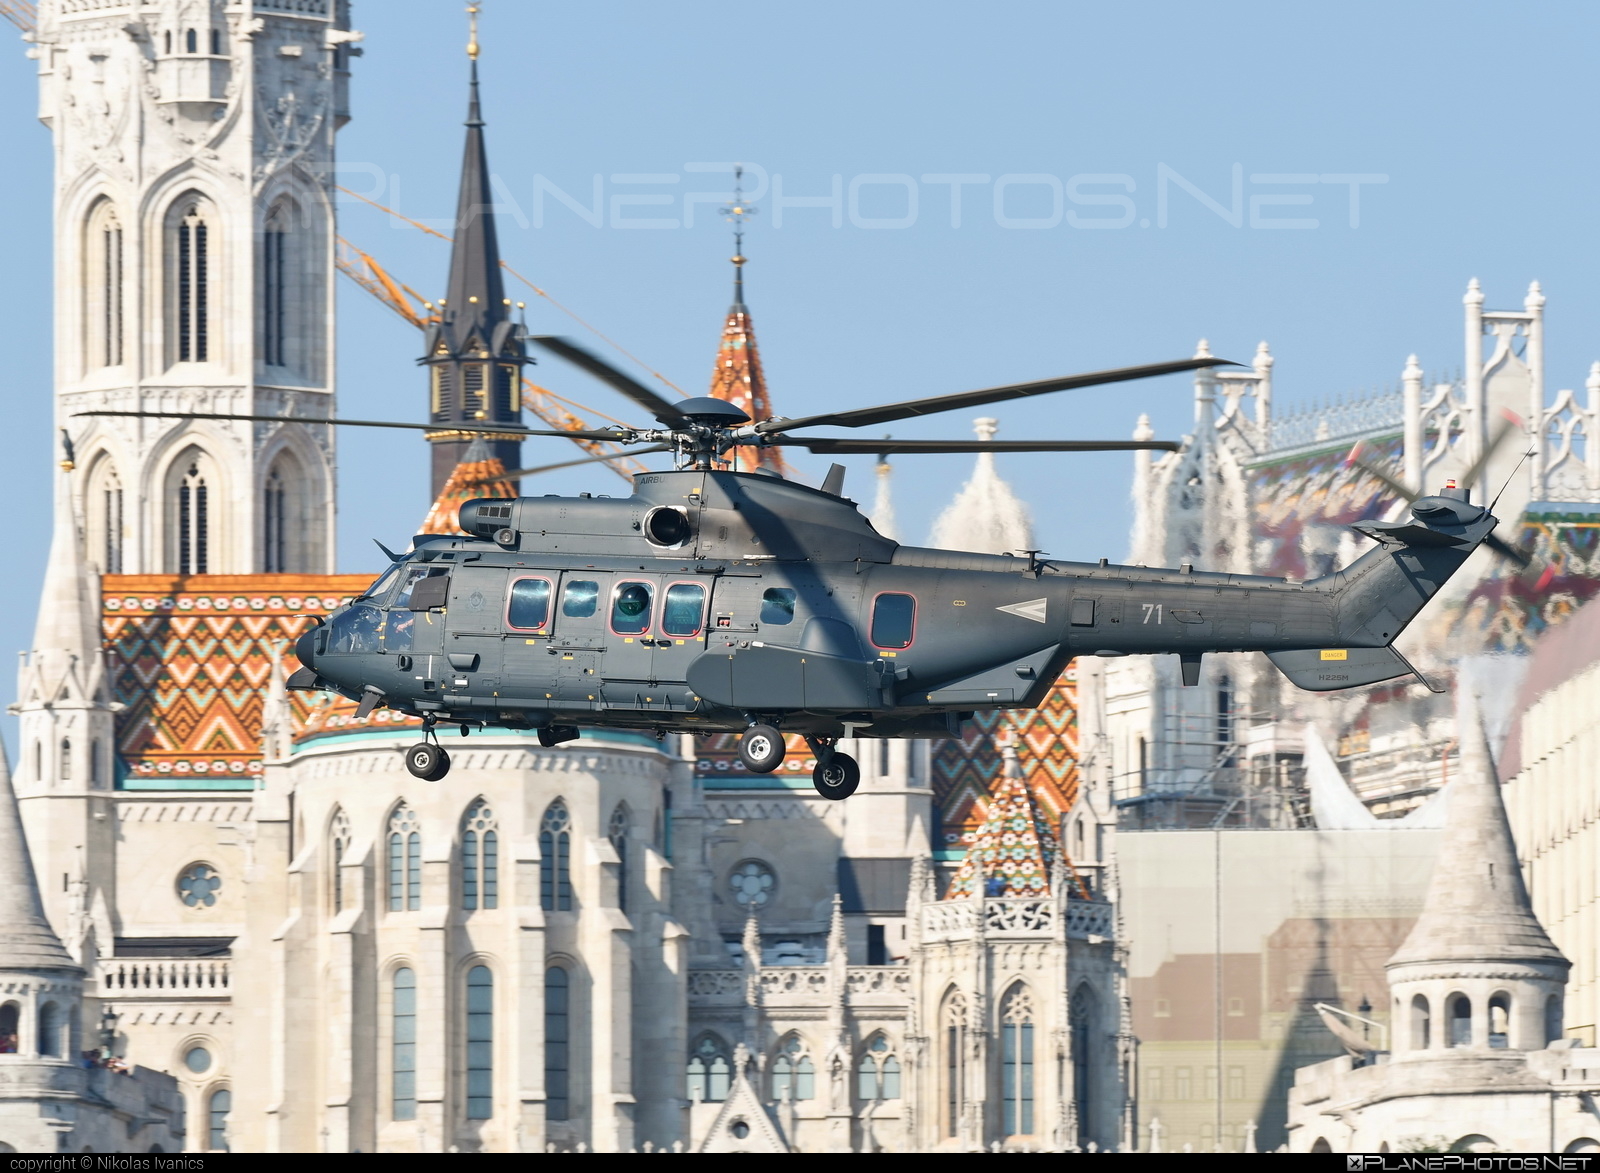 Airbus Helicopters H225M Super Puma - 71 operated by Magyar Légierő (Hungarian Air Force) #H225MSuperPuma #airbushelicopters #hungarianairforce #magyarlegiero